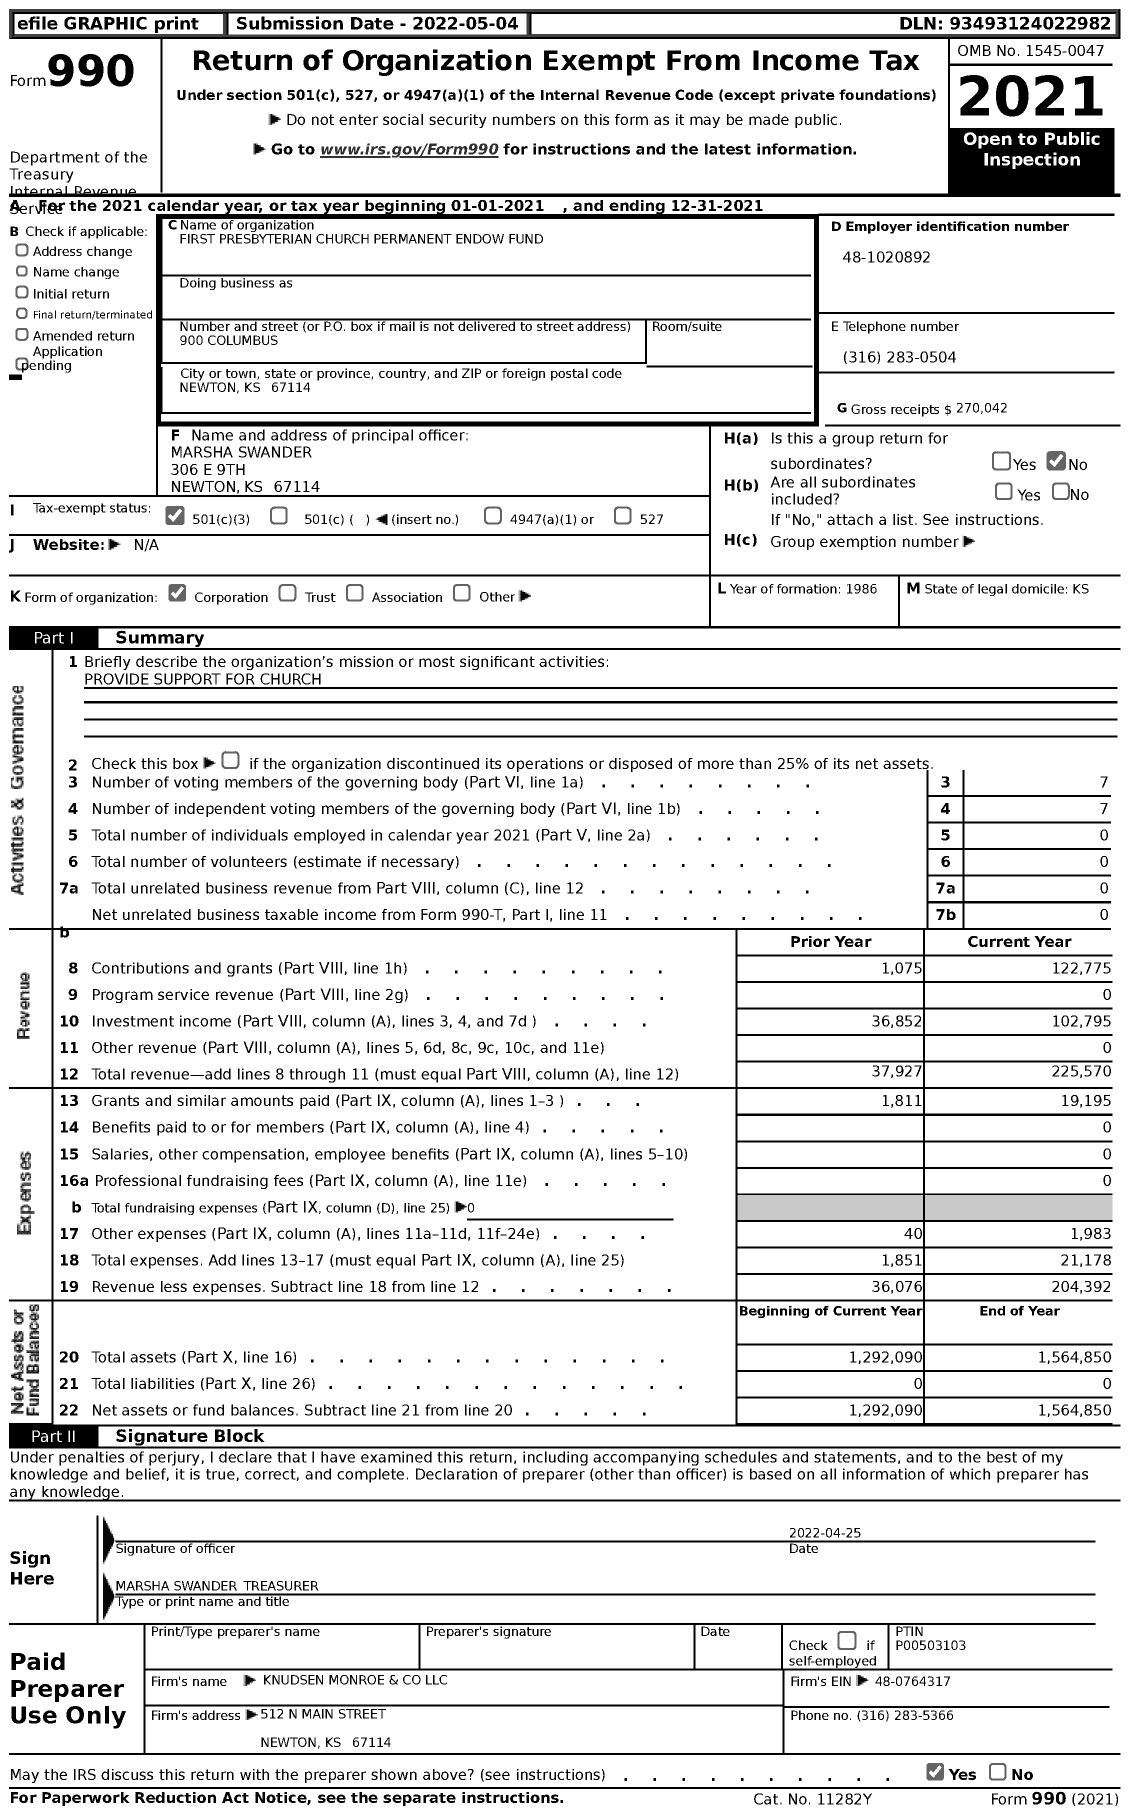 Image of first page of 2021 Form 990 for First Presbyterian Church Permanent Endow Fund